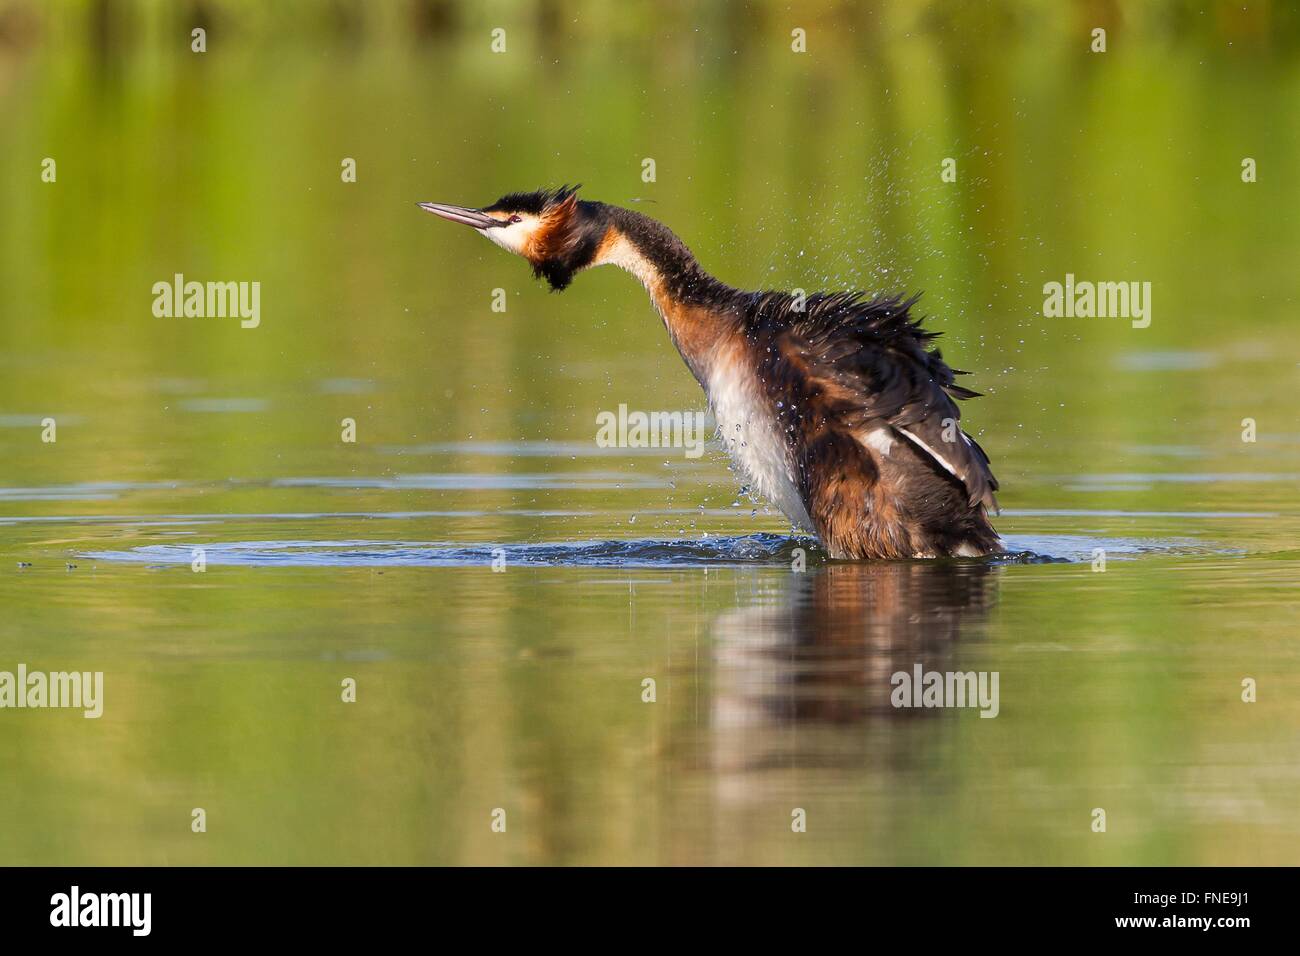 Great crested grebe (Podiceps cristatus) shaking feathers in water, Hesse, Germany Stock Photo